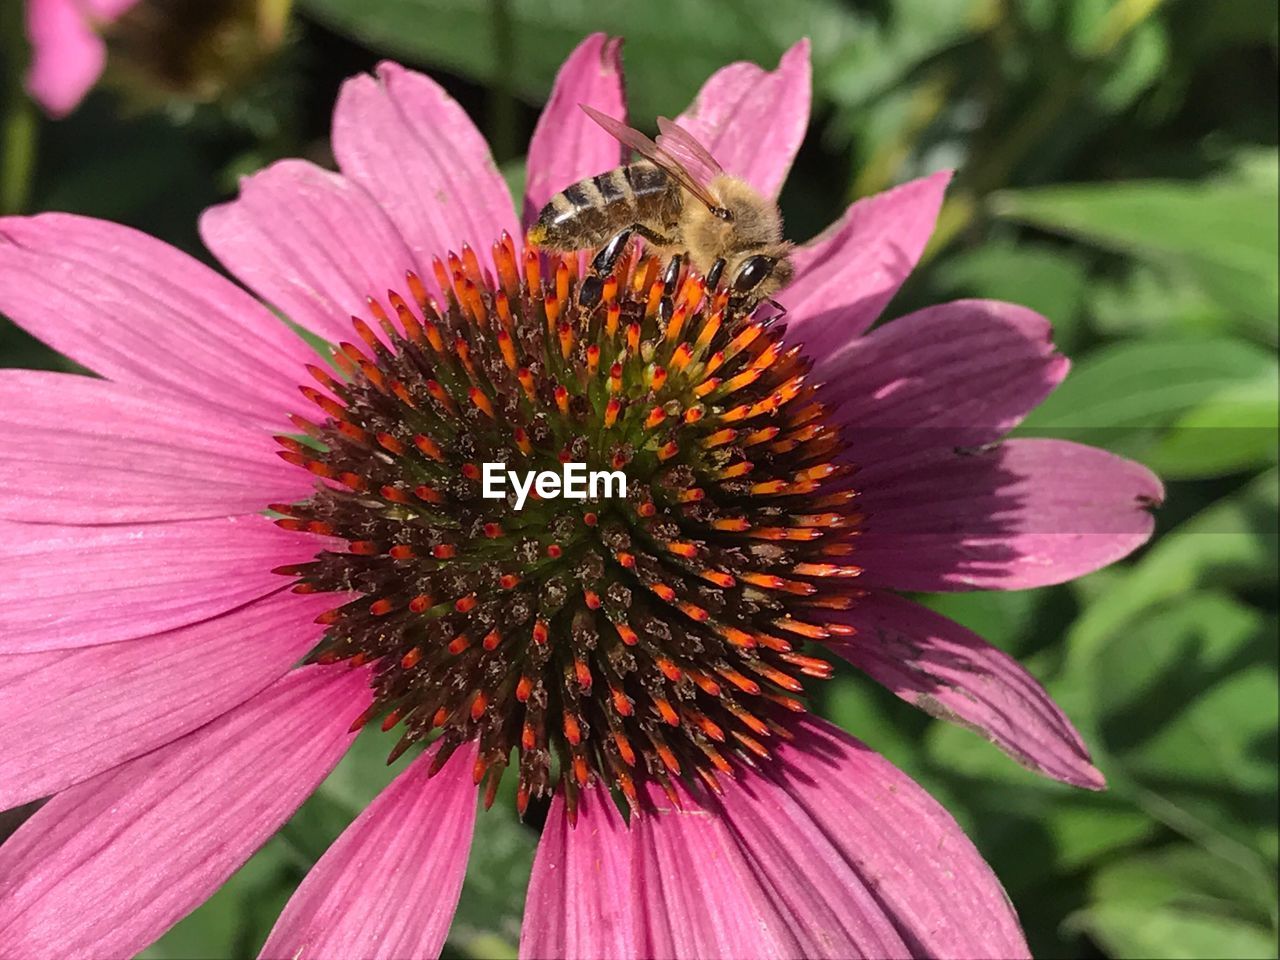 CLOSE-UP OF HONEY BEE ON PINK CONEFLOWER